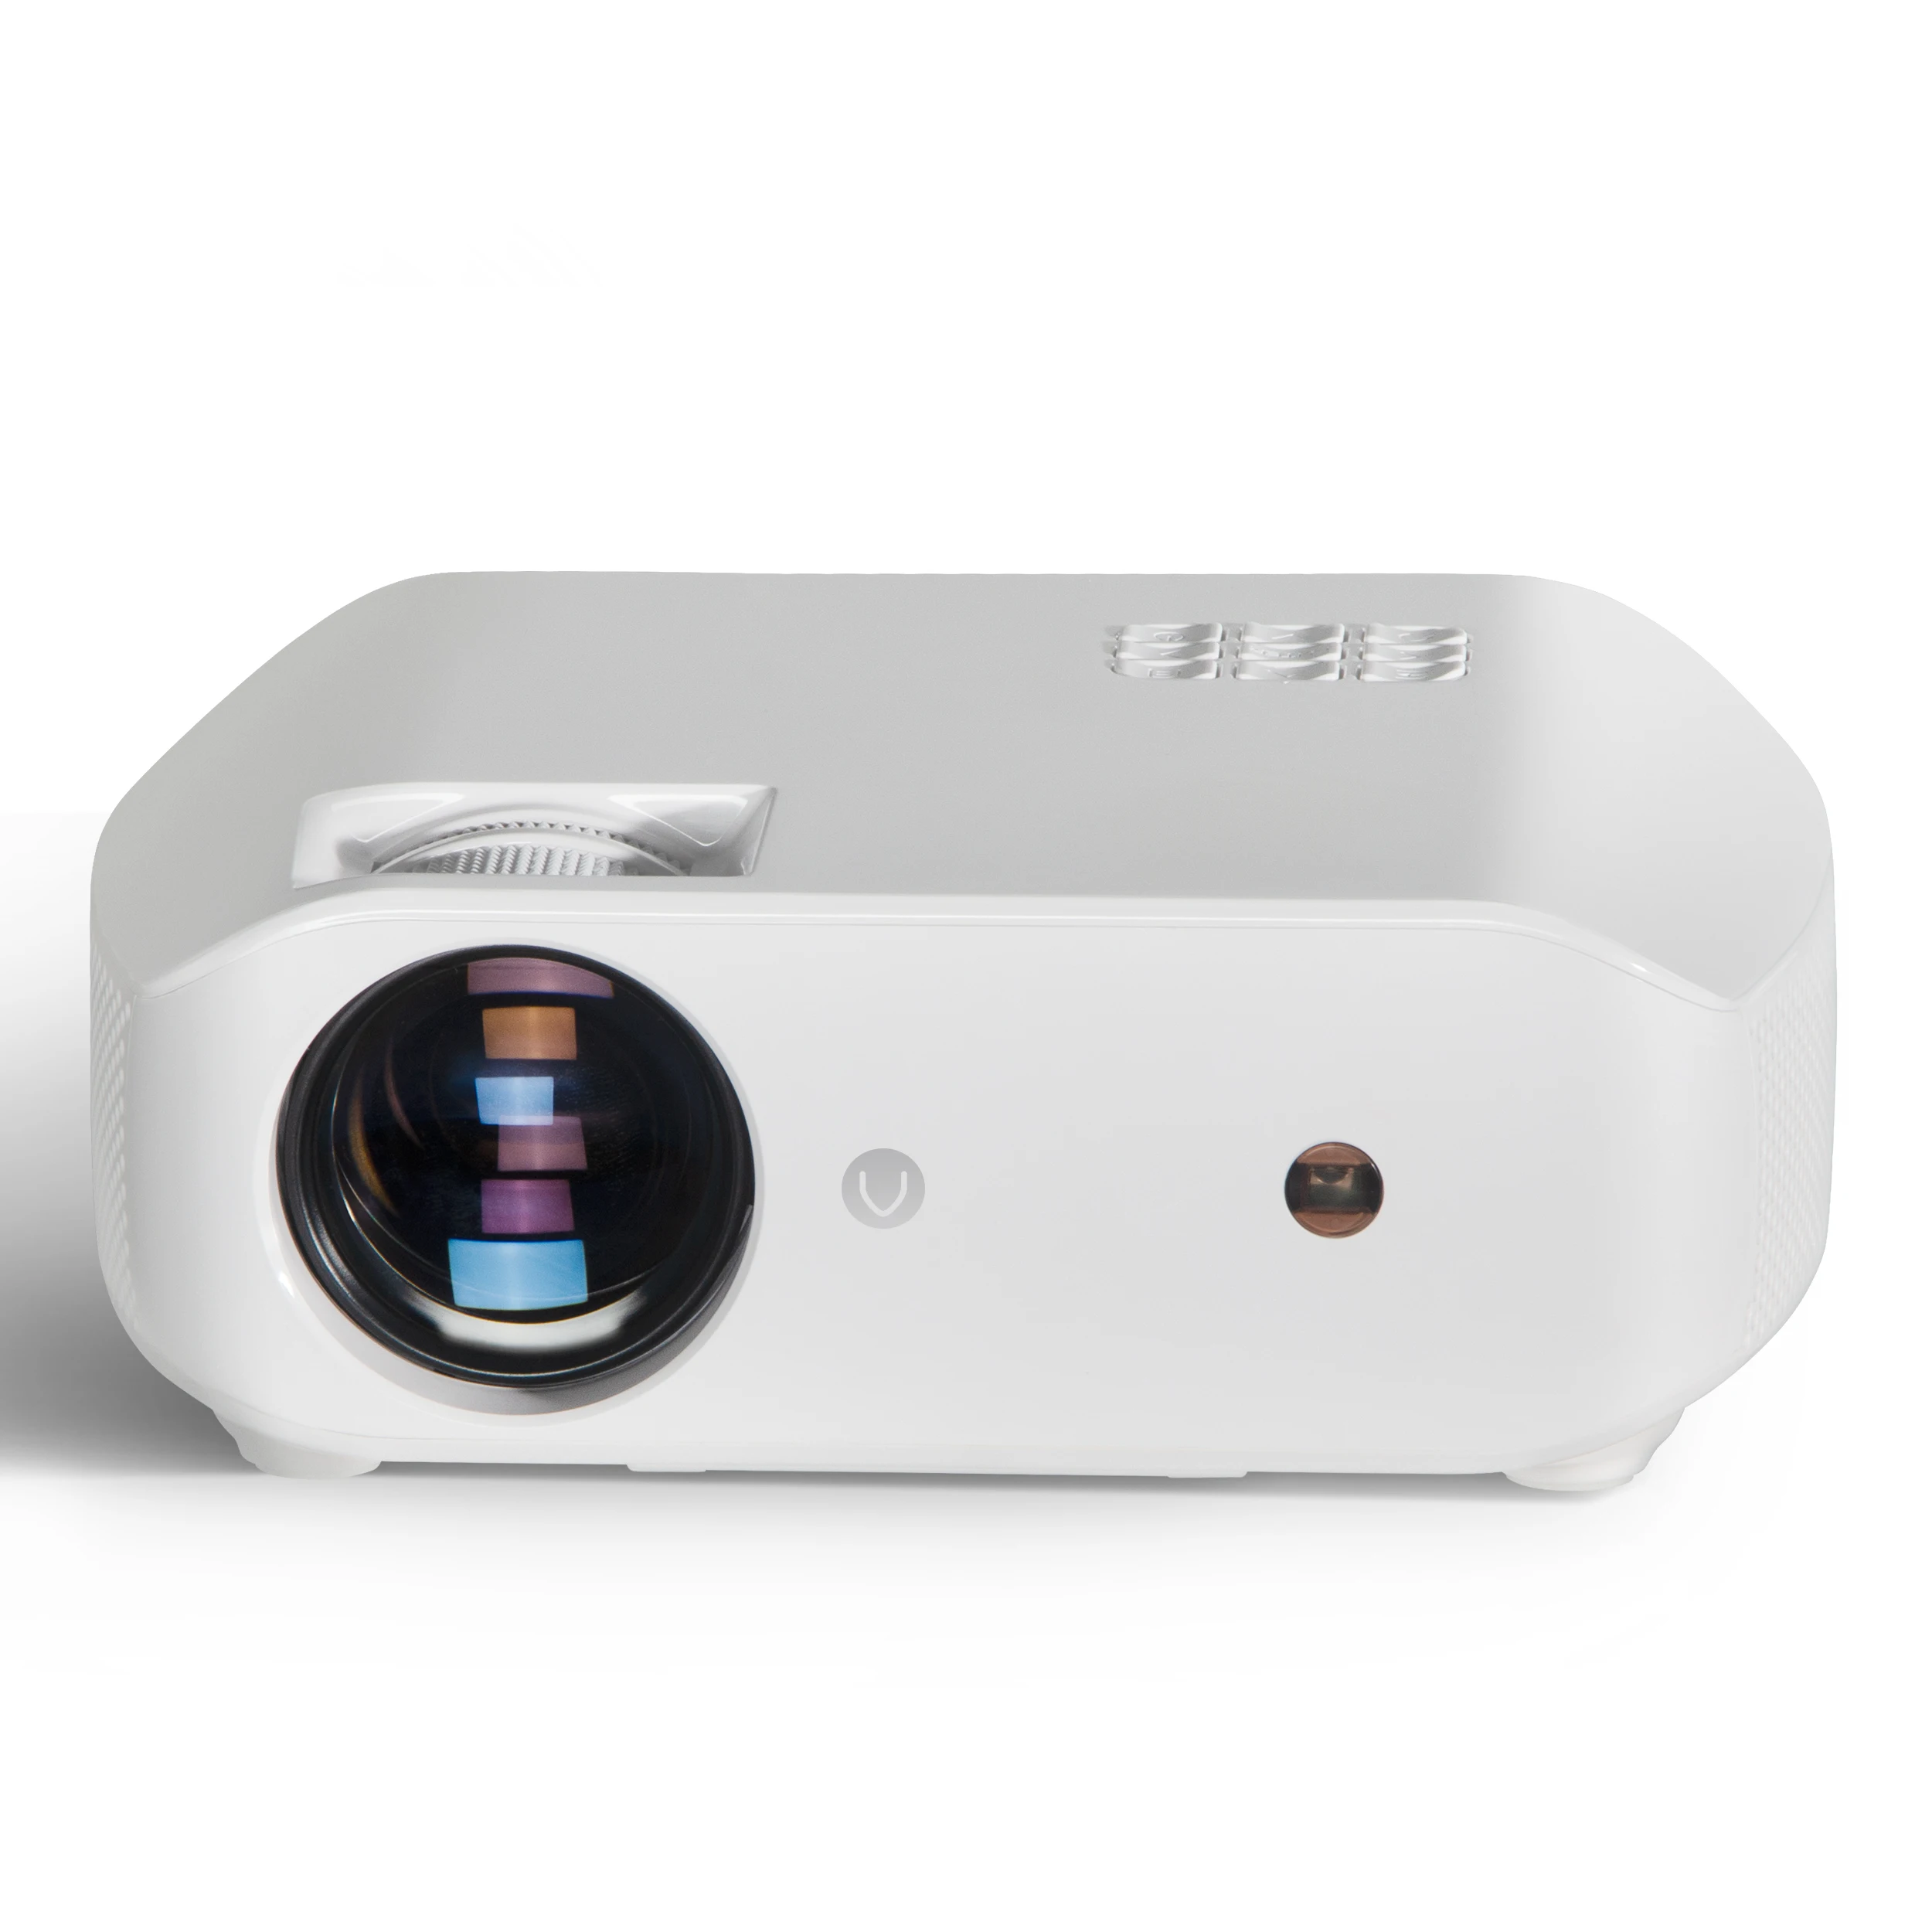 

Vivibright Hot 720P 3500 high lumens Compact size 4.0 inch F10 Android Micro portable video projector mini beamer led projector